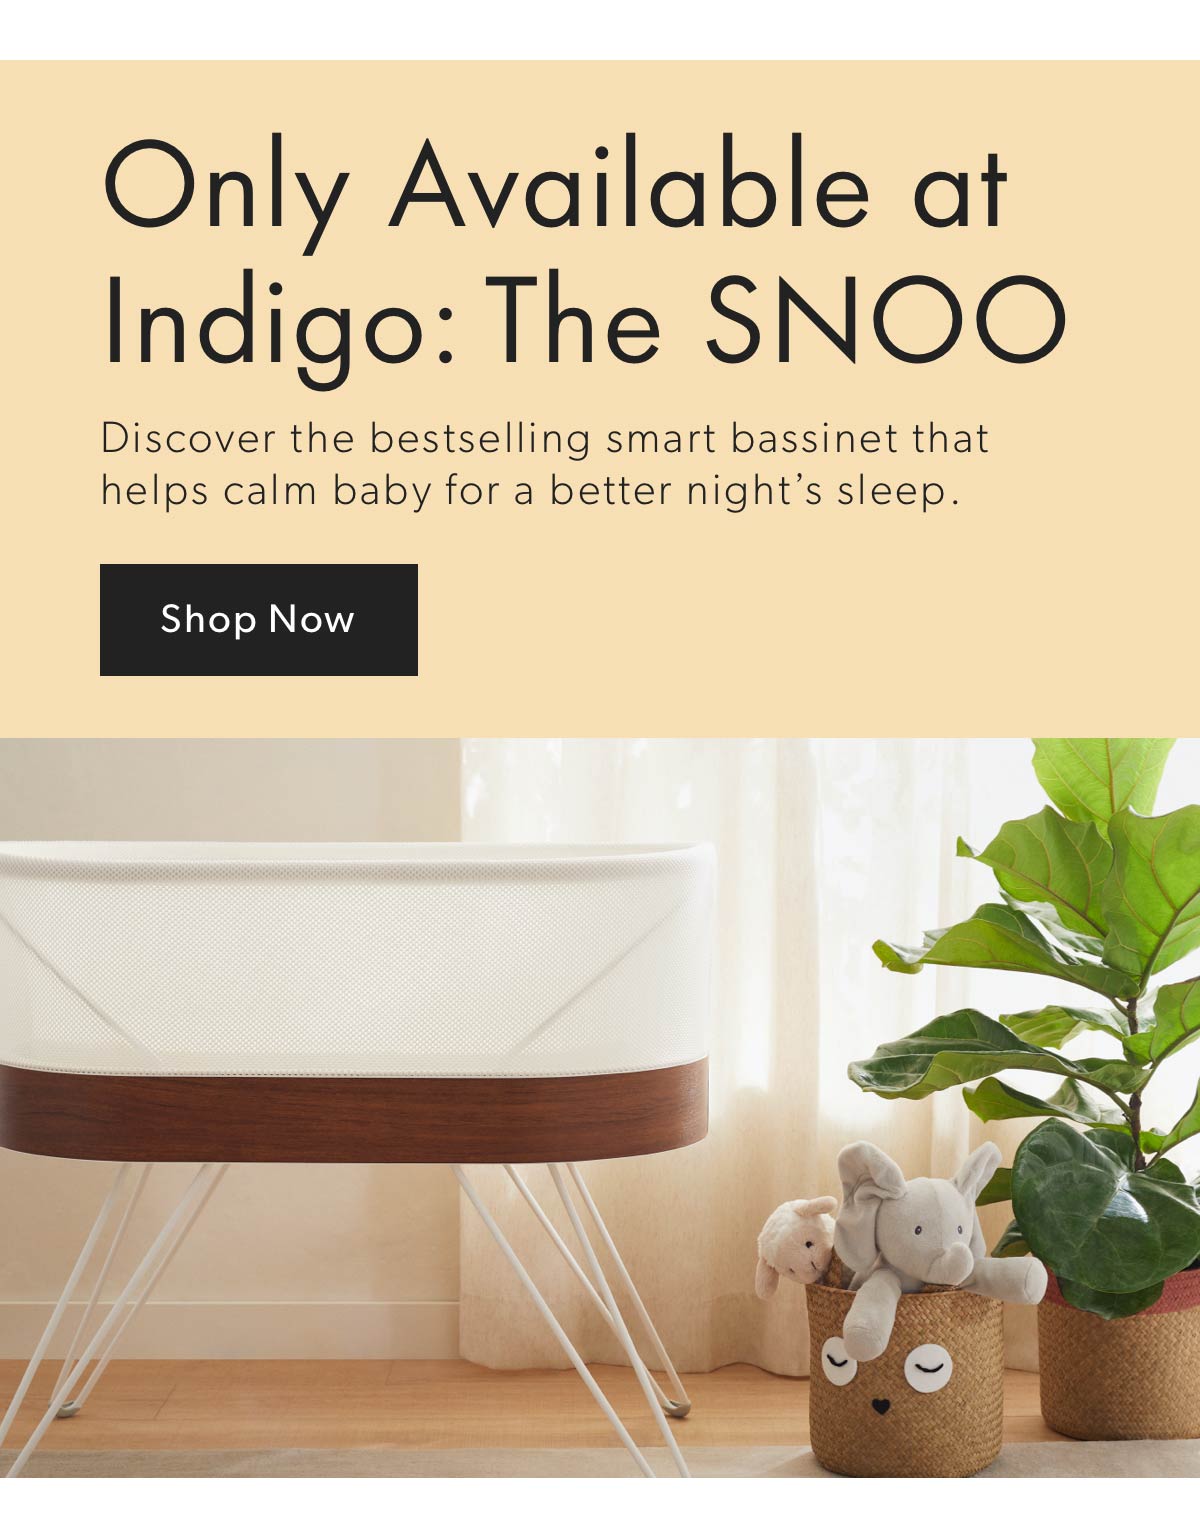 Only Available at Indigo: The SNOO